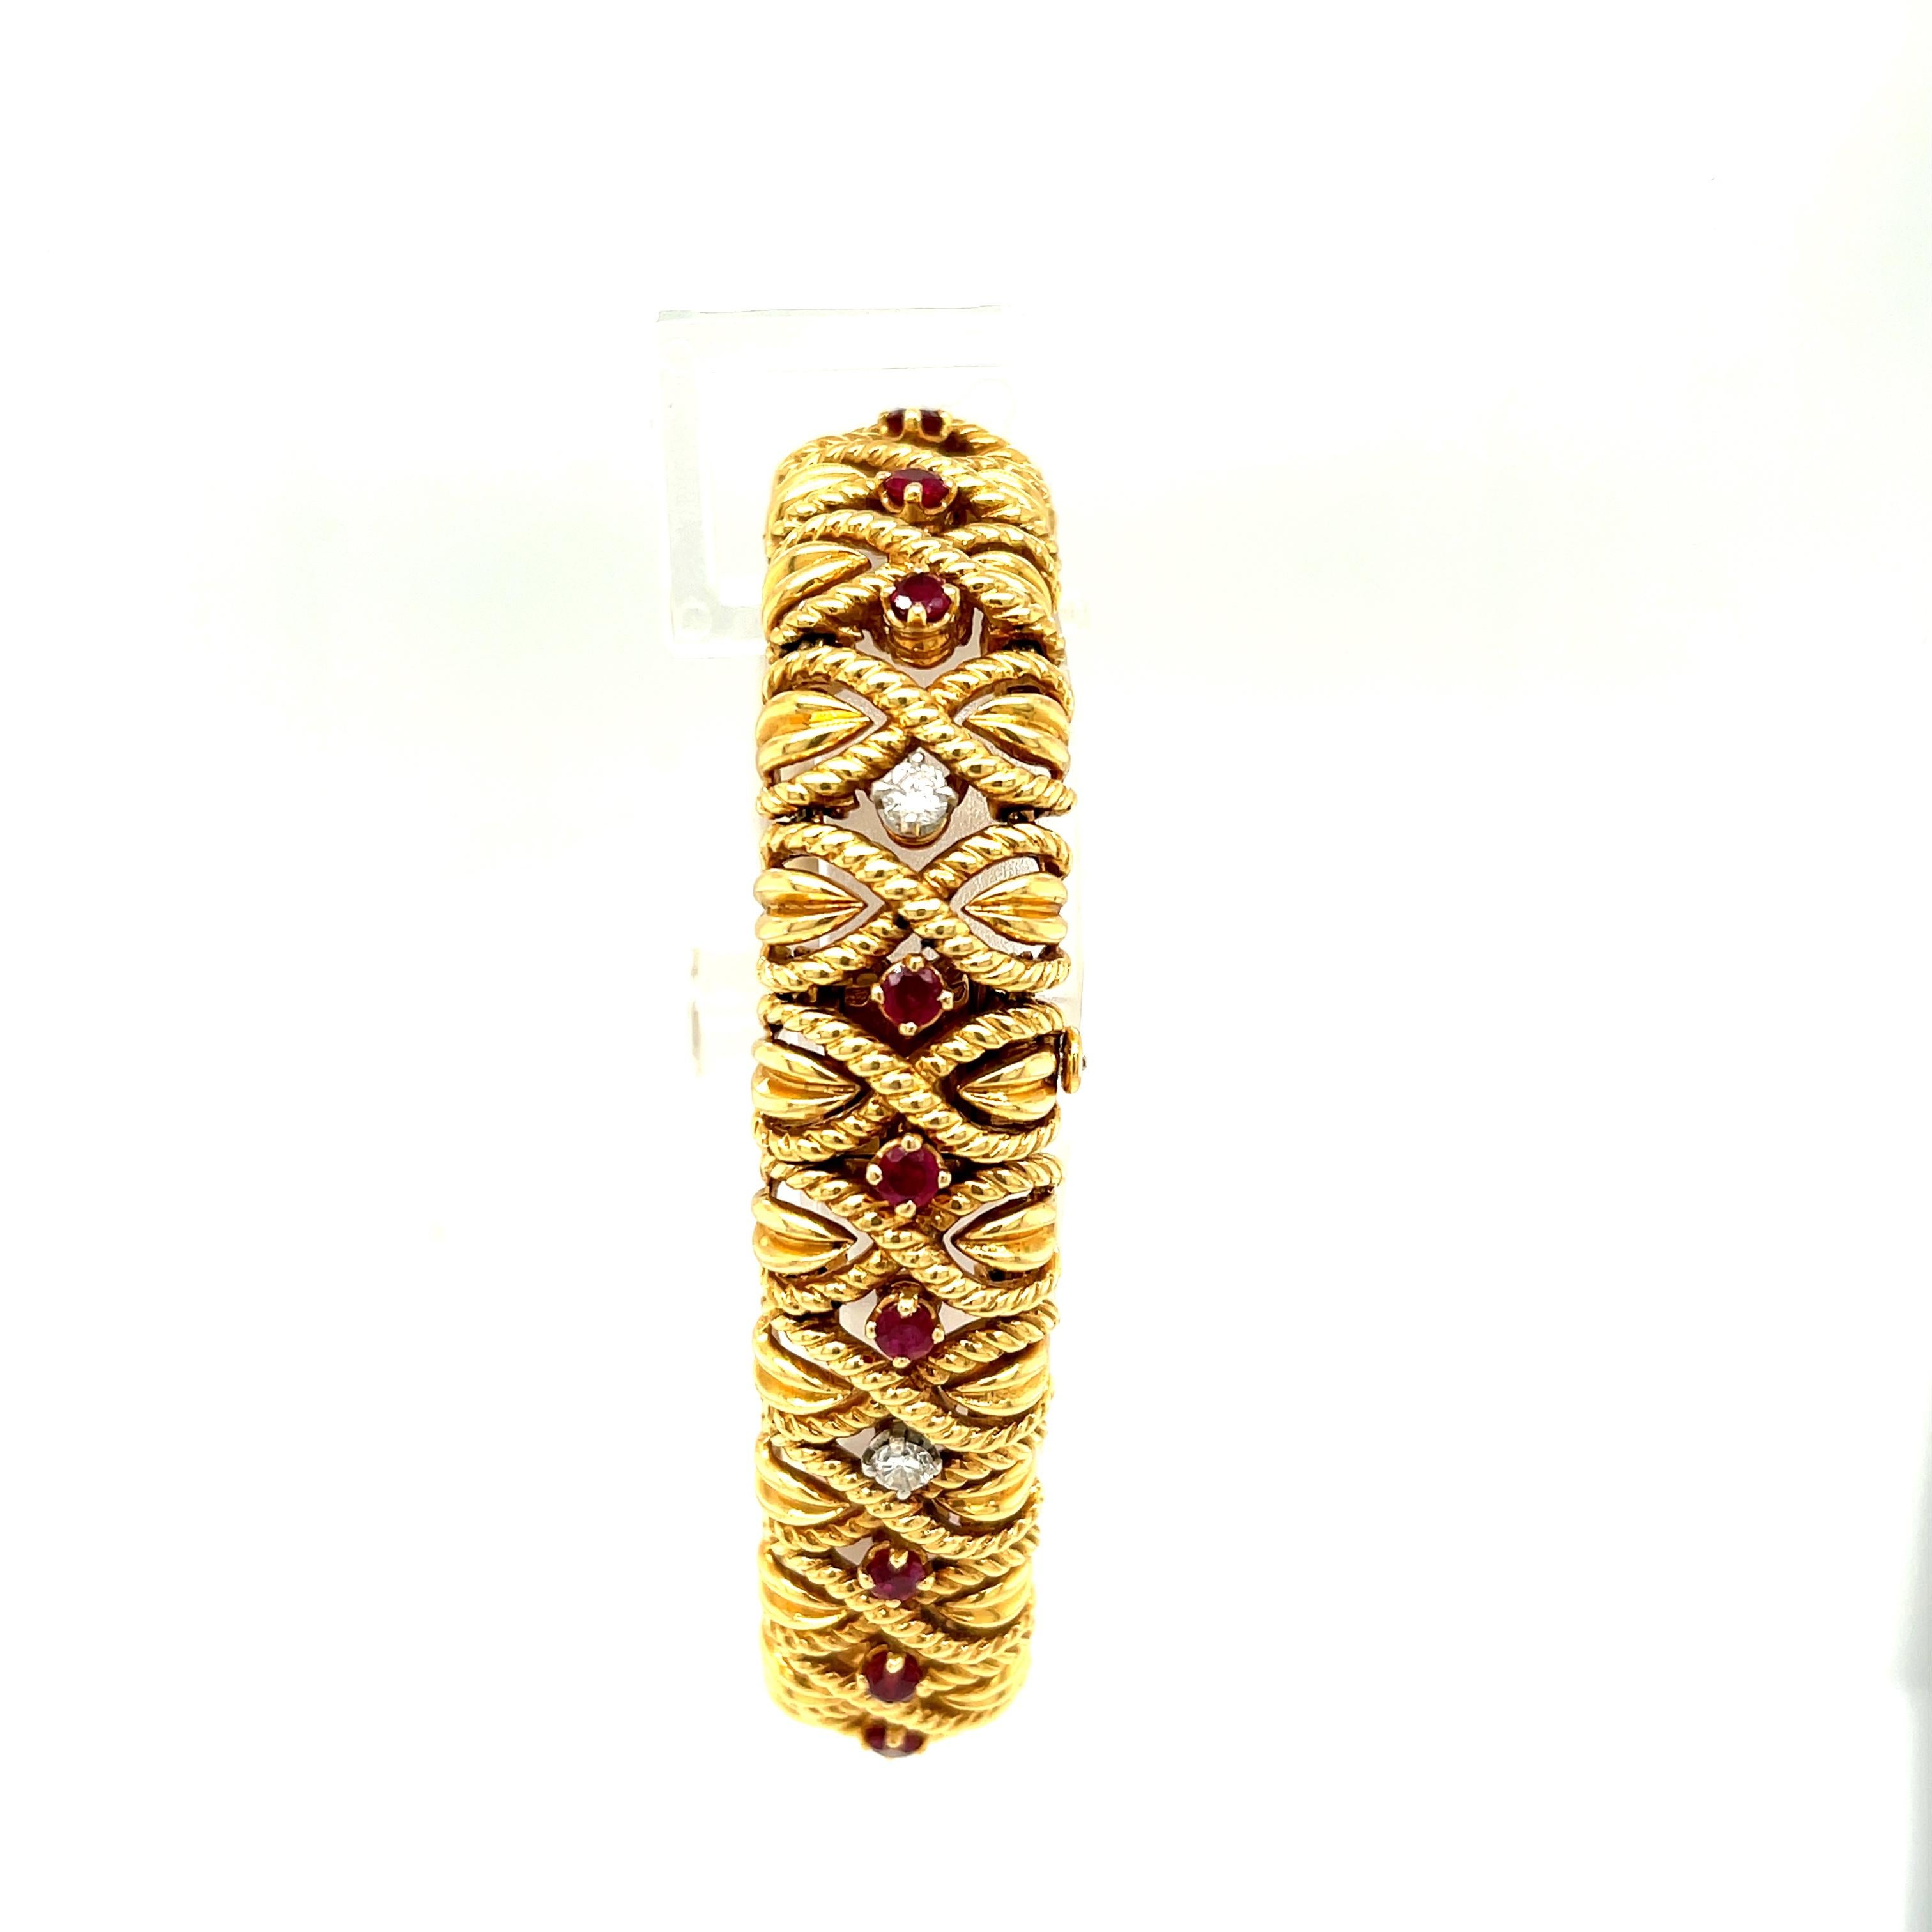 Vintage twisted 18k gold bracelet set with rubies and diamonds by Van Cleef & Arpels, circa 1970. The bracelet has 17 rubies and 6 diamonds weighing about 0.60 carats. The bracelet is signed VCA 750 with serial numbers and French makers mark and